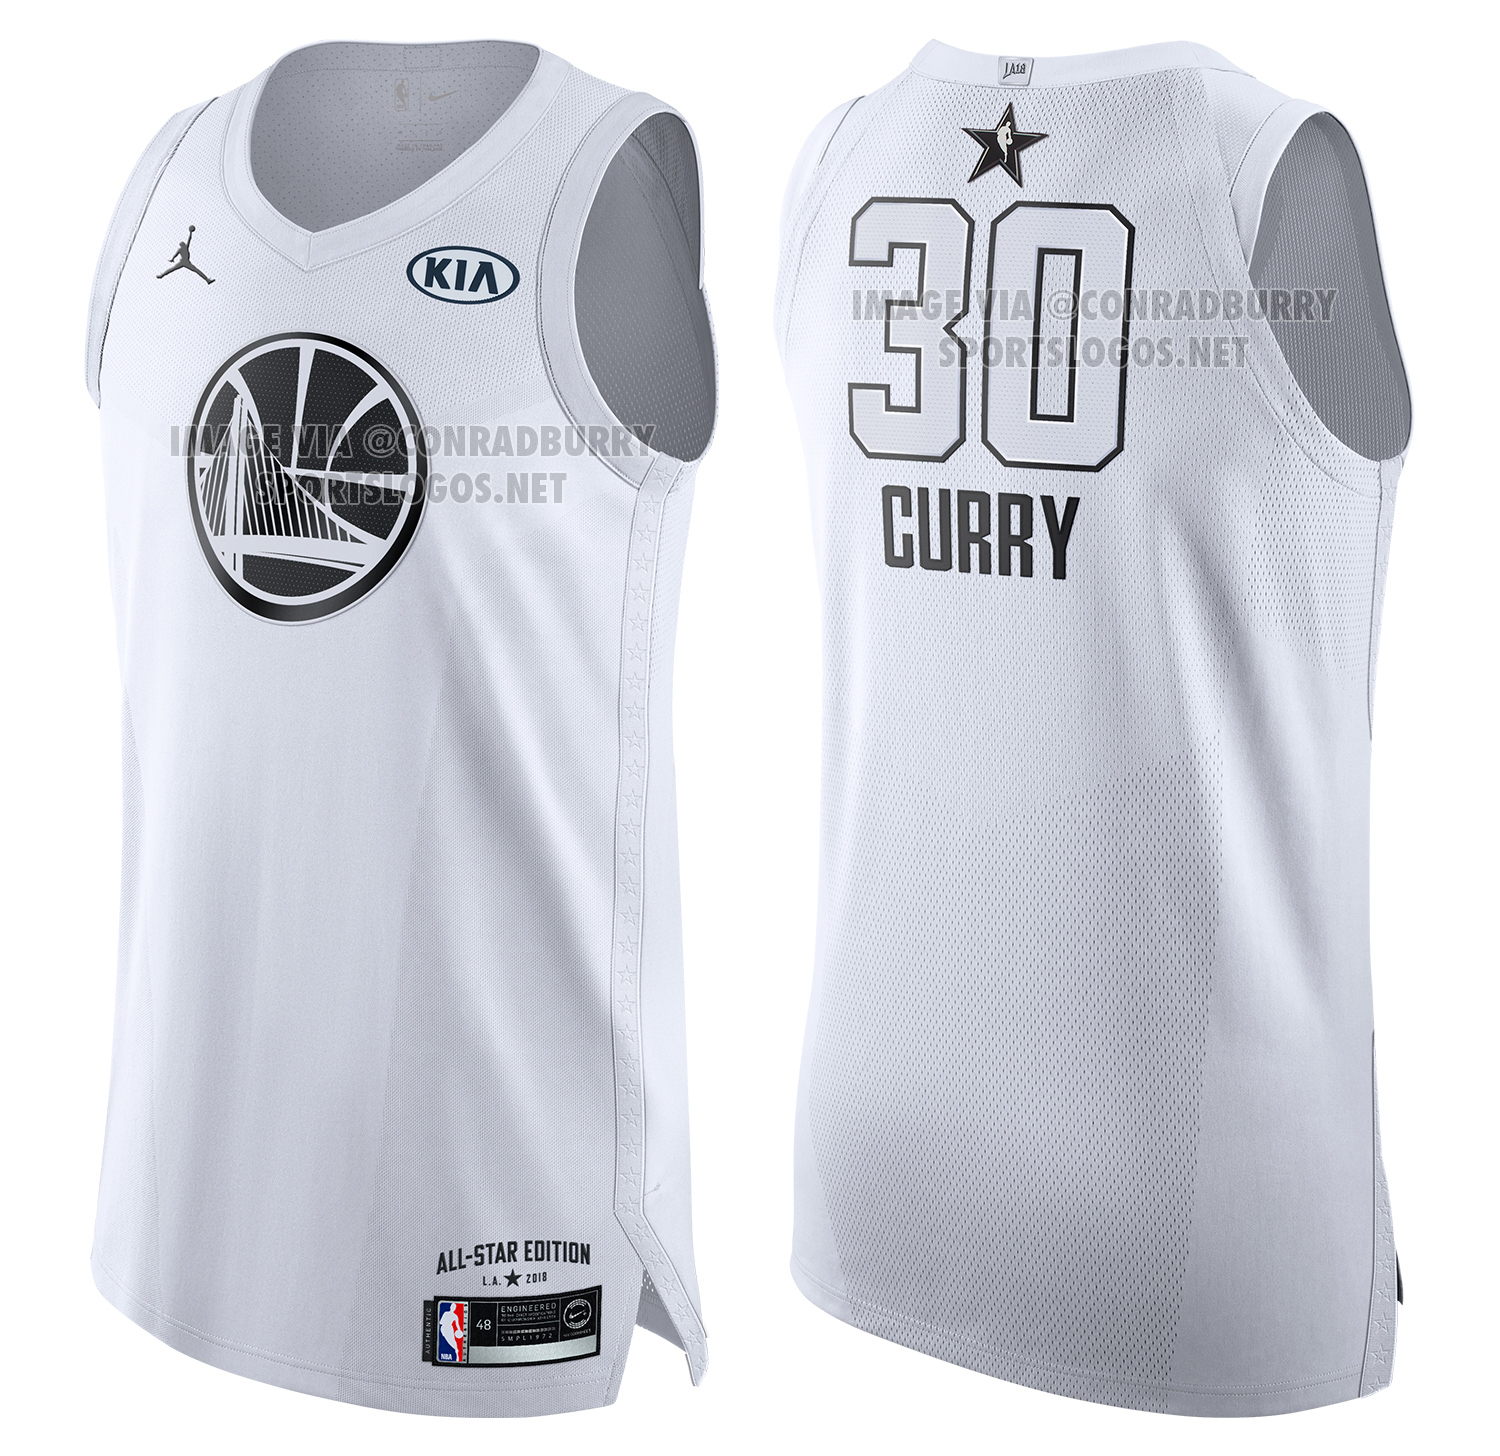 authentic nba all star jerseys